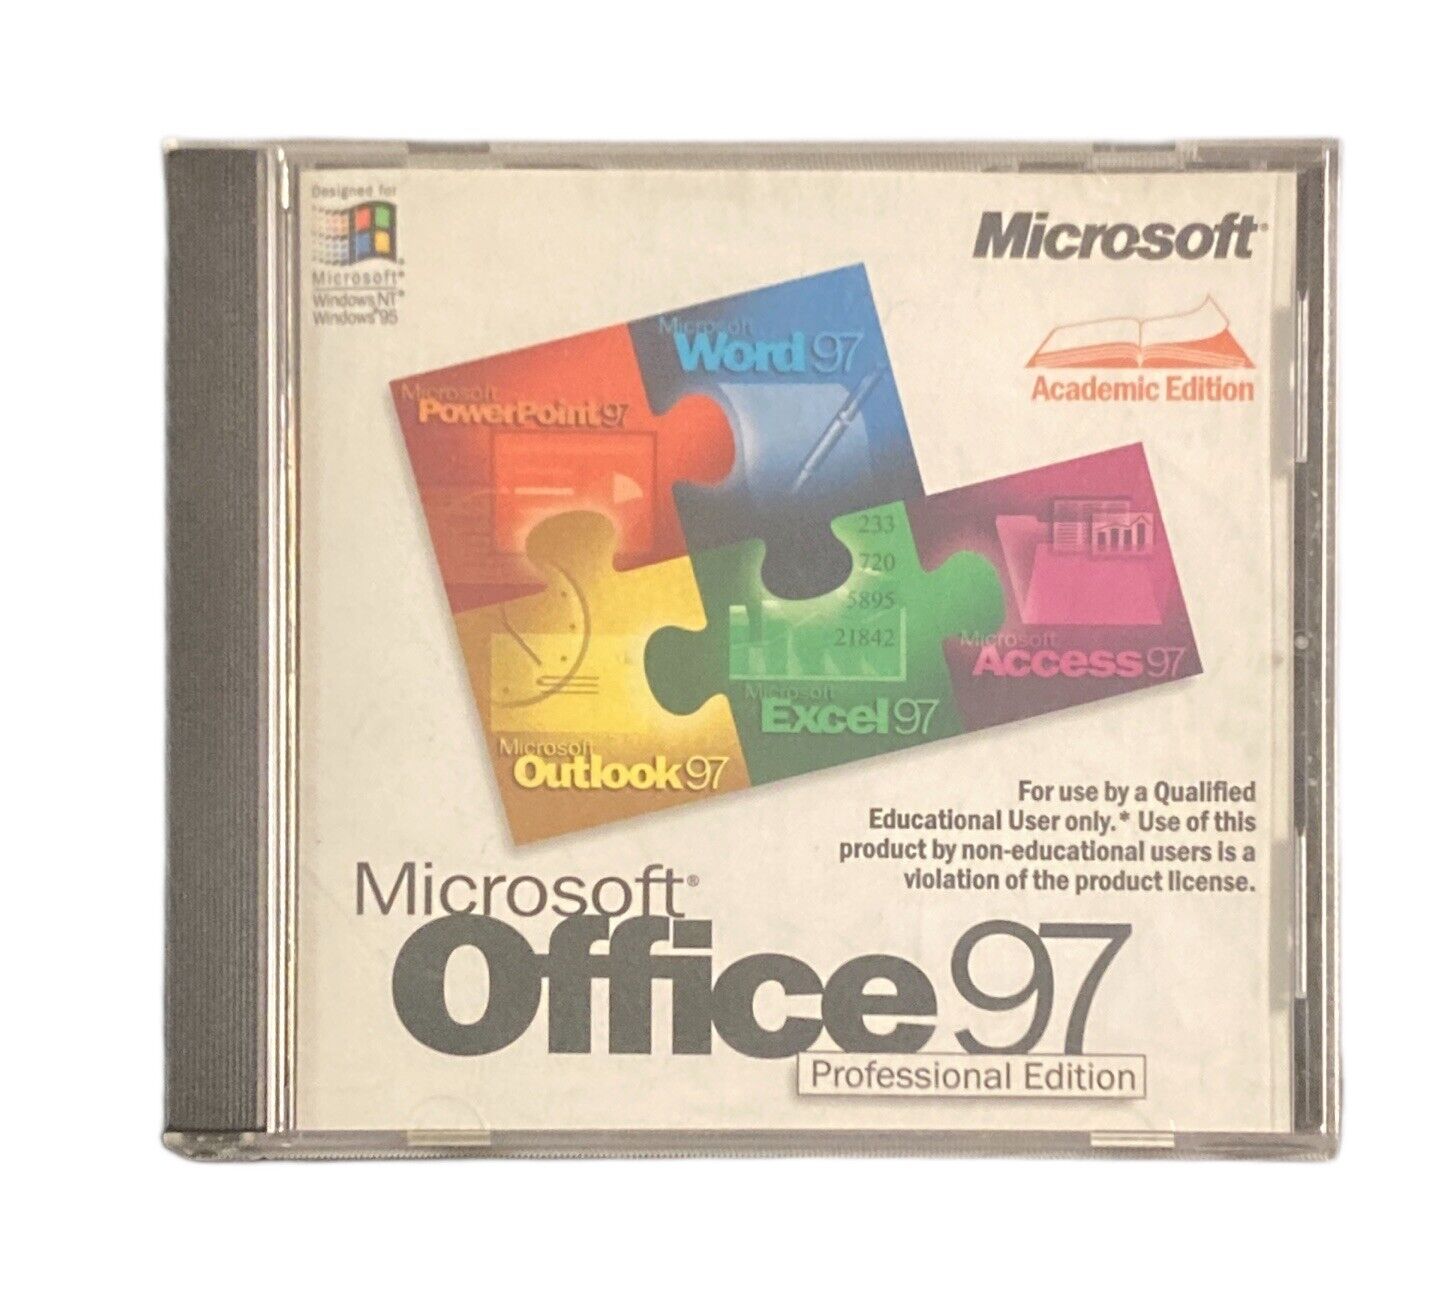 Microsoft Office 97 Software Professional Edition Academic Edition Windows NT 95